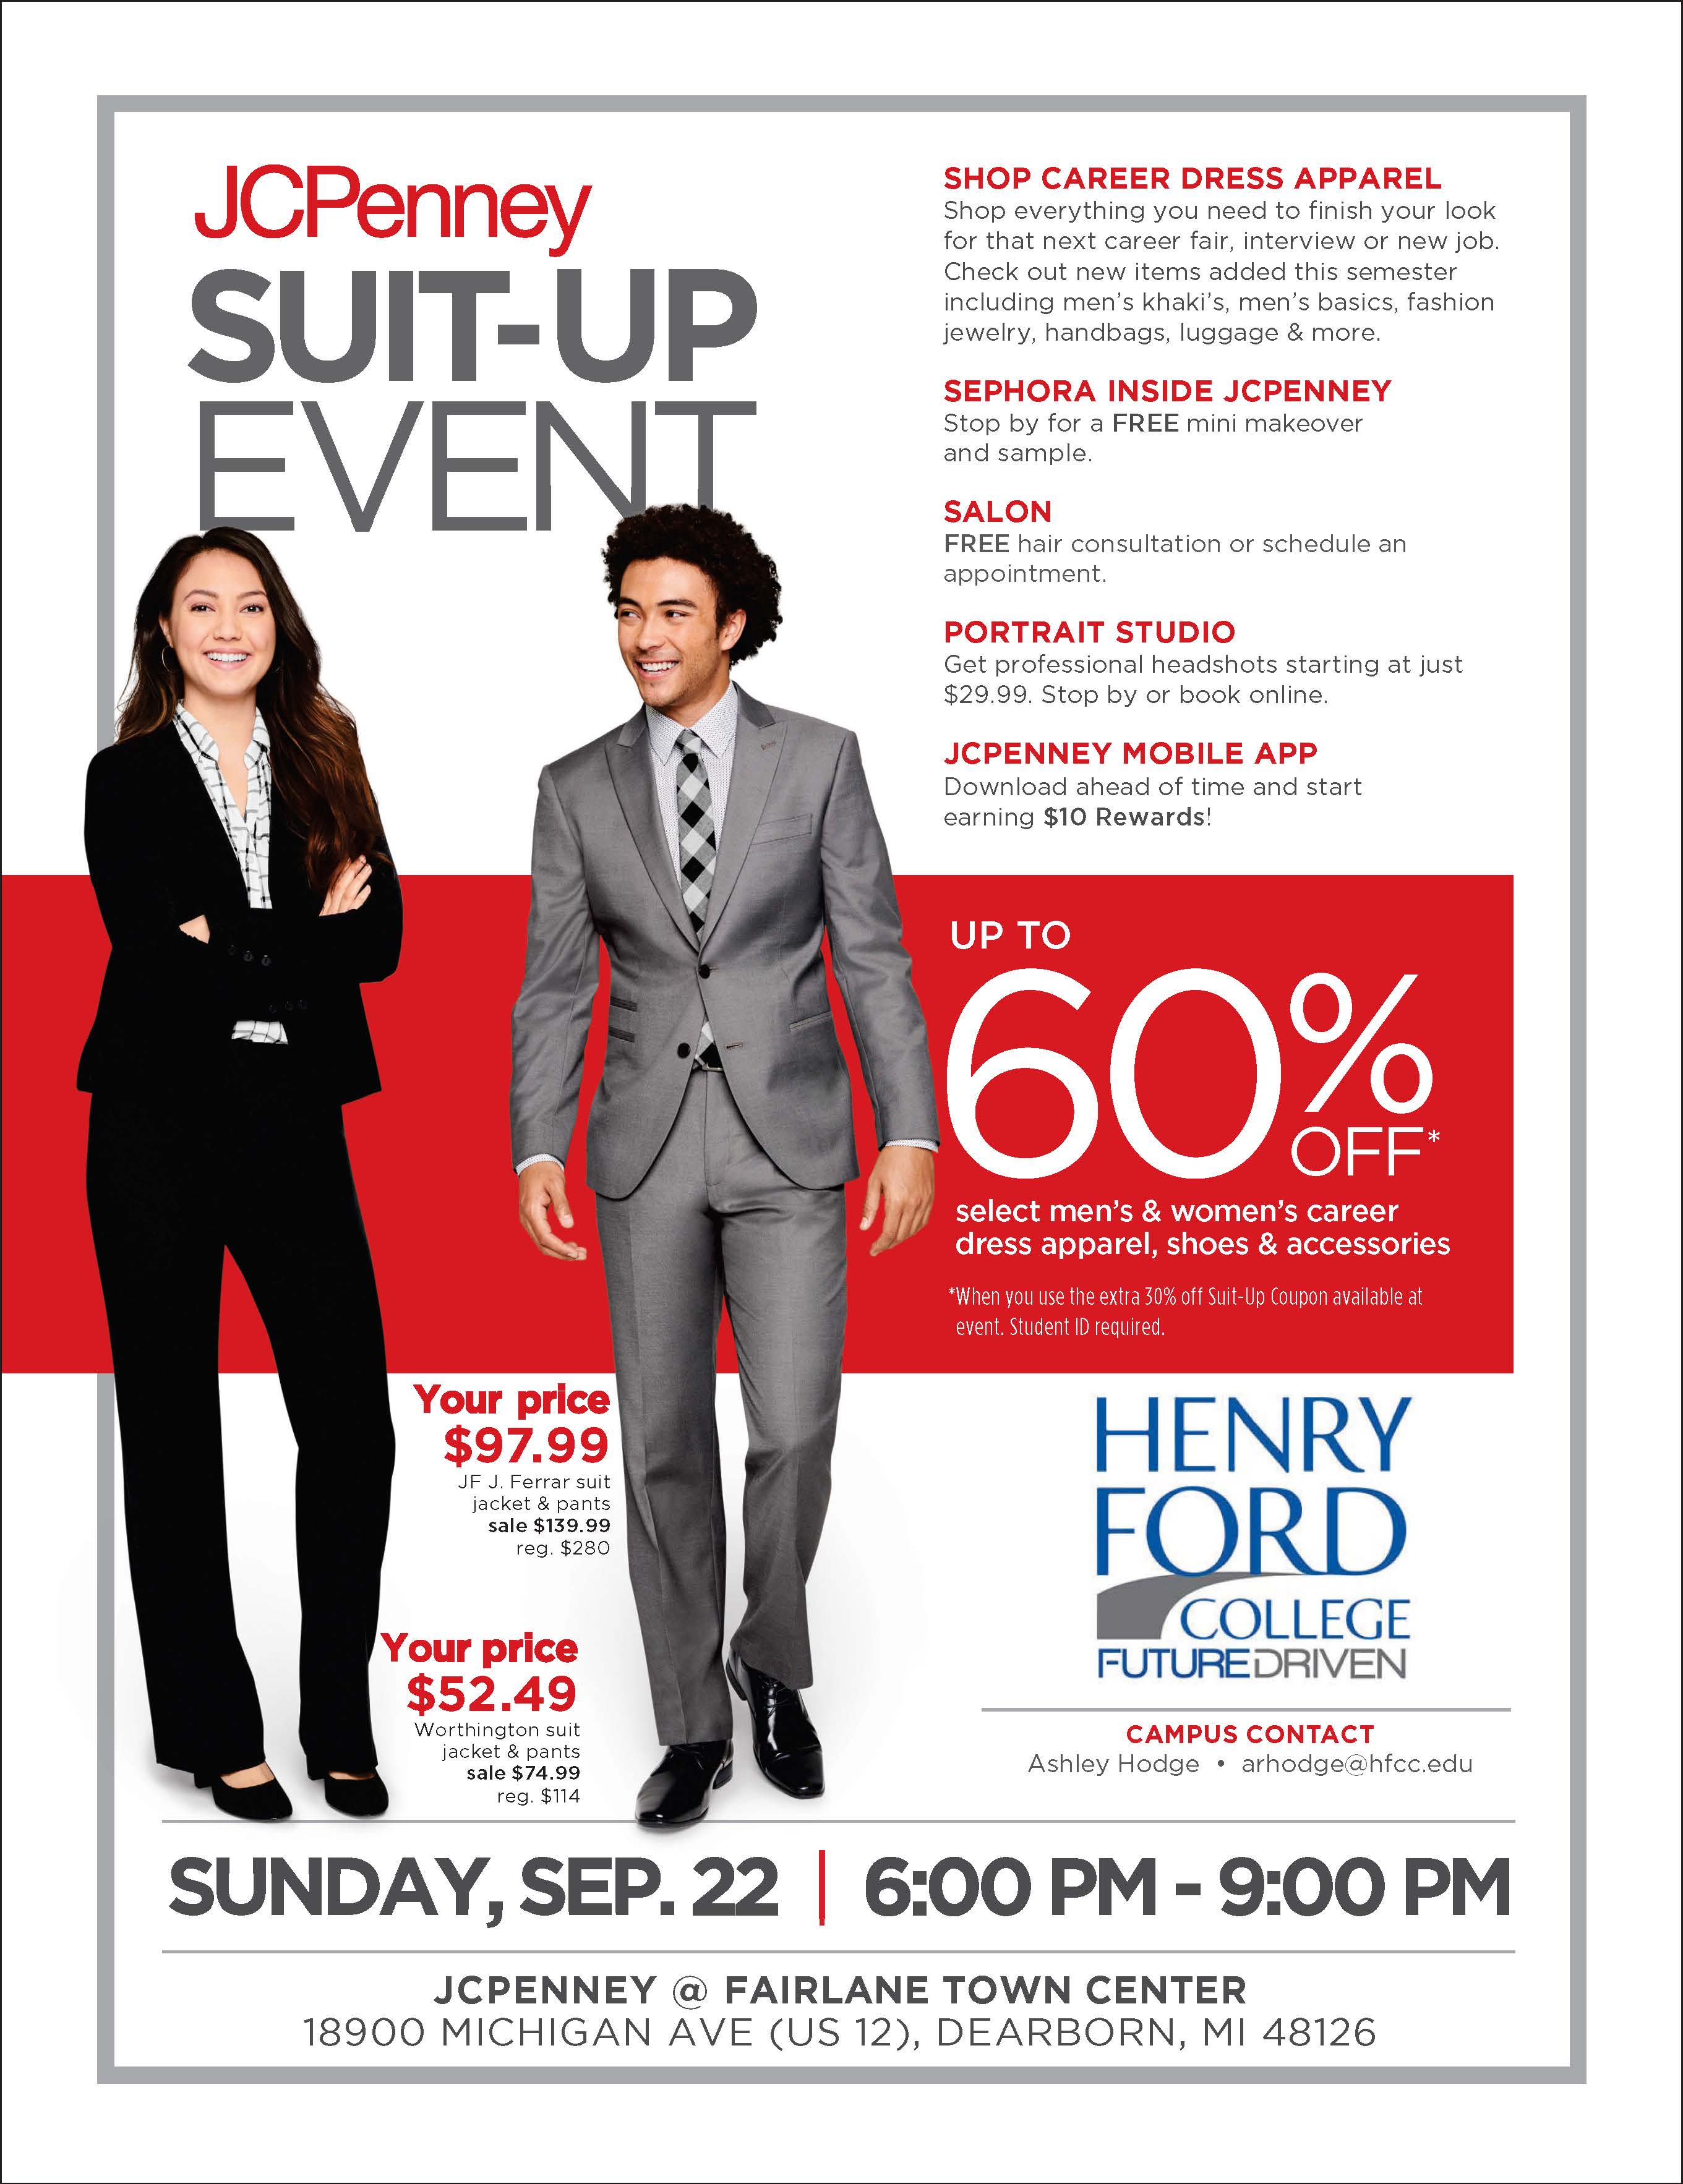 JCPenney to hold Suit-Up Event Sept. 22 for HFC students, staff